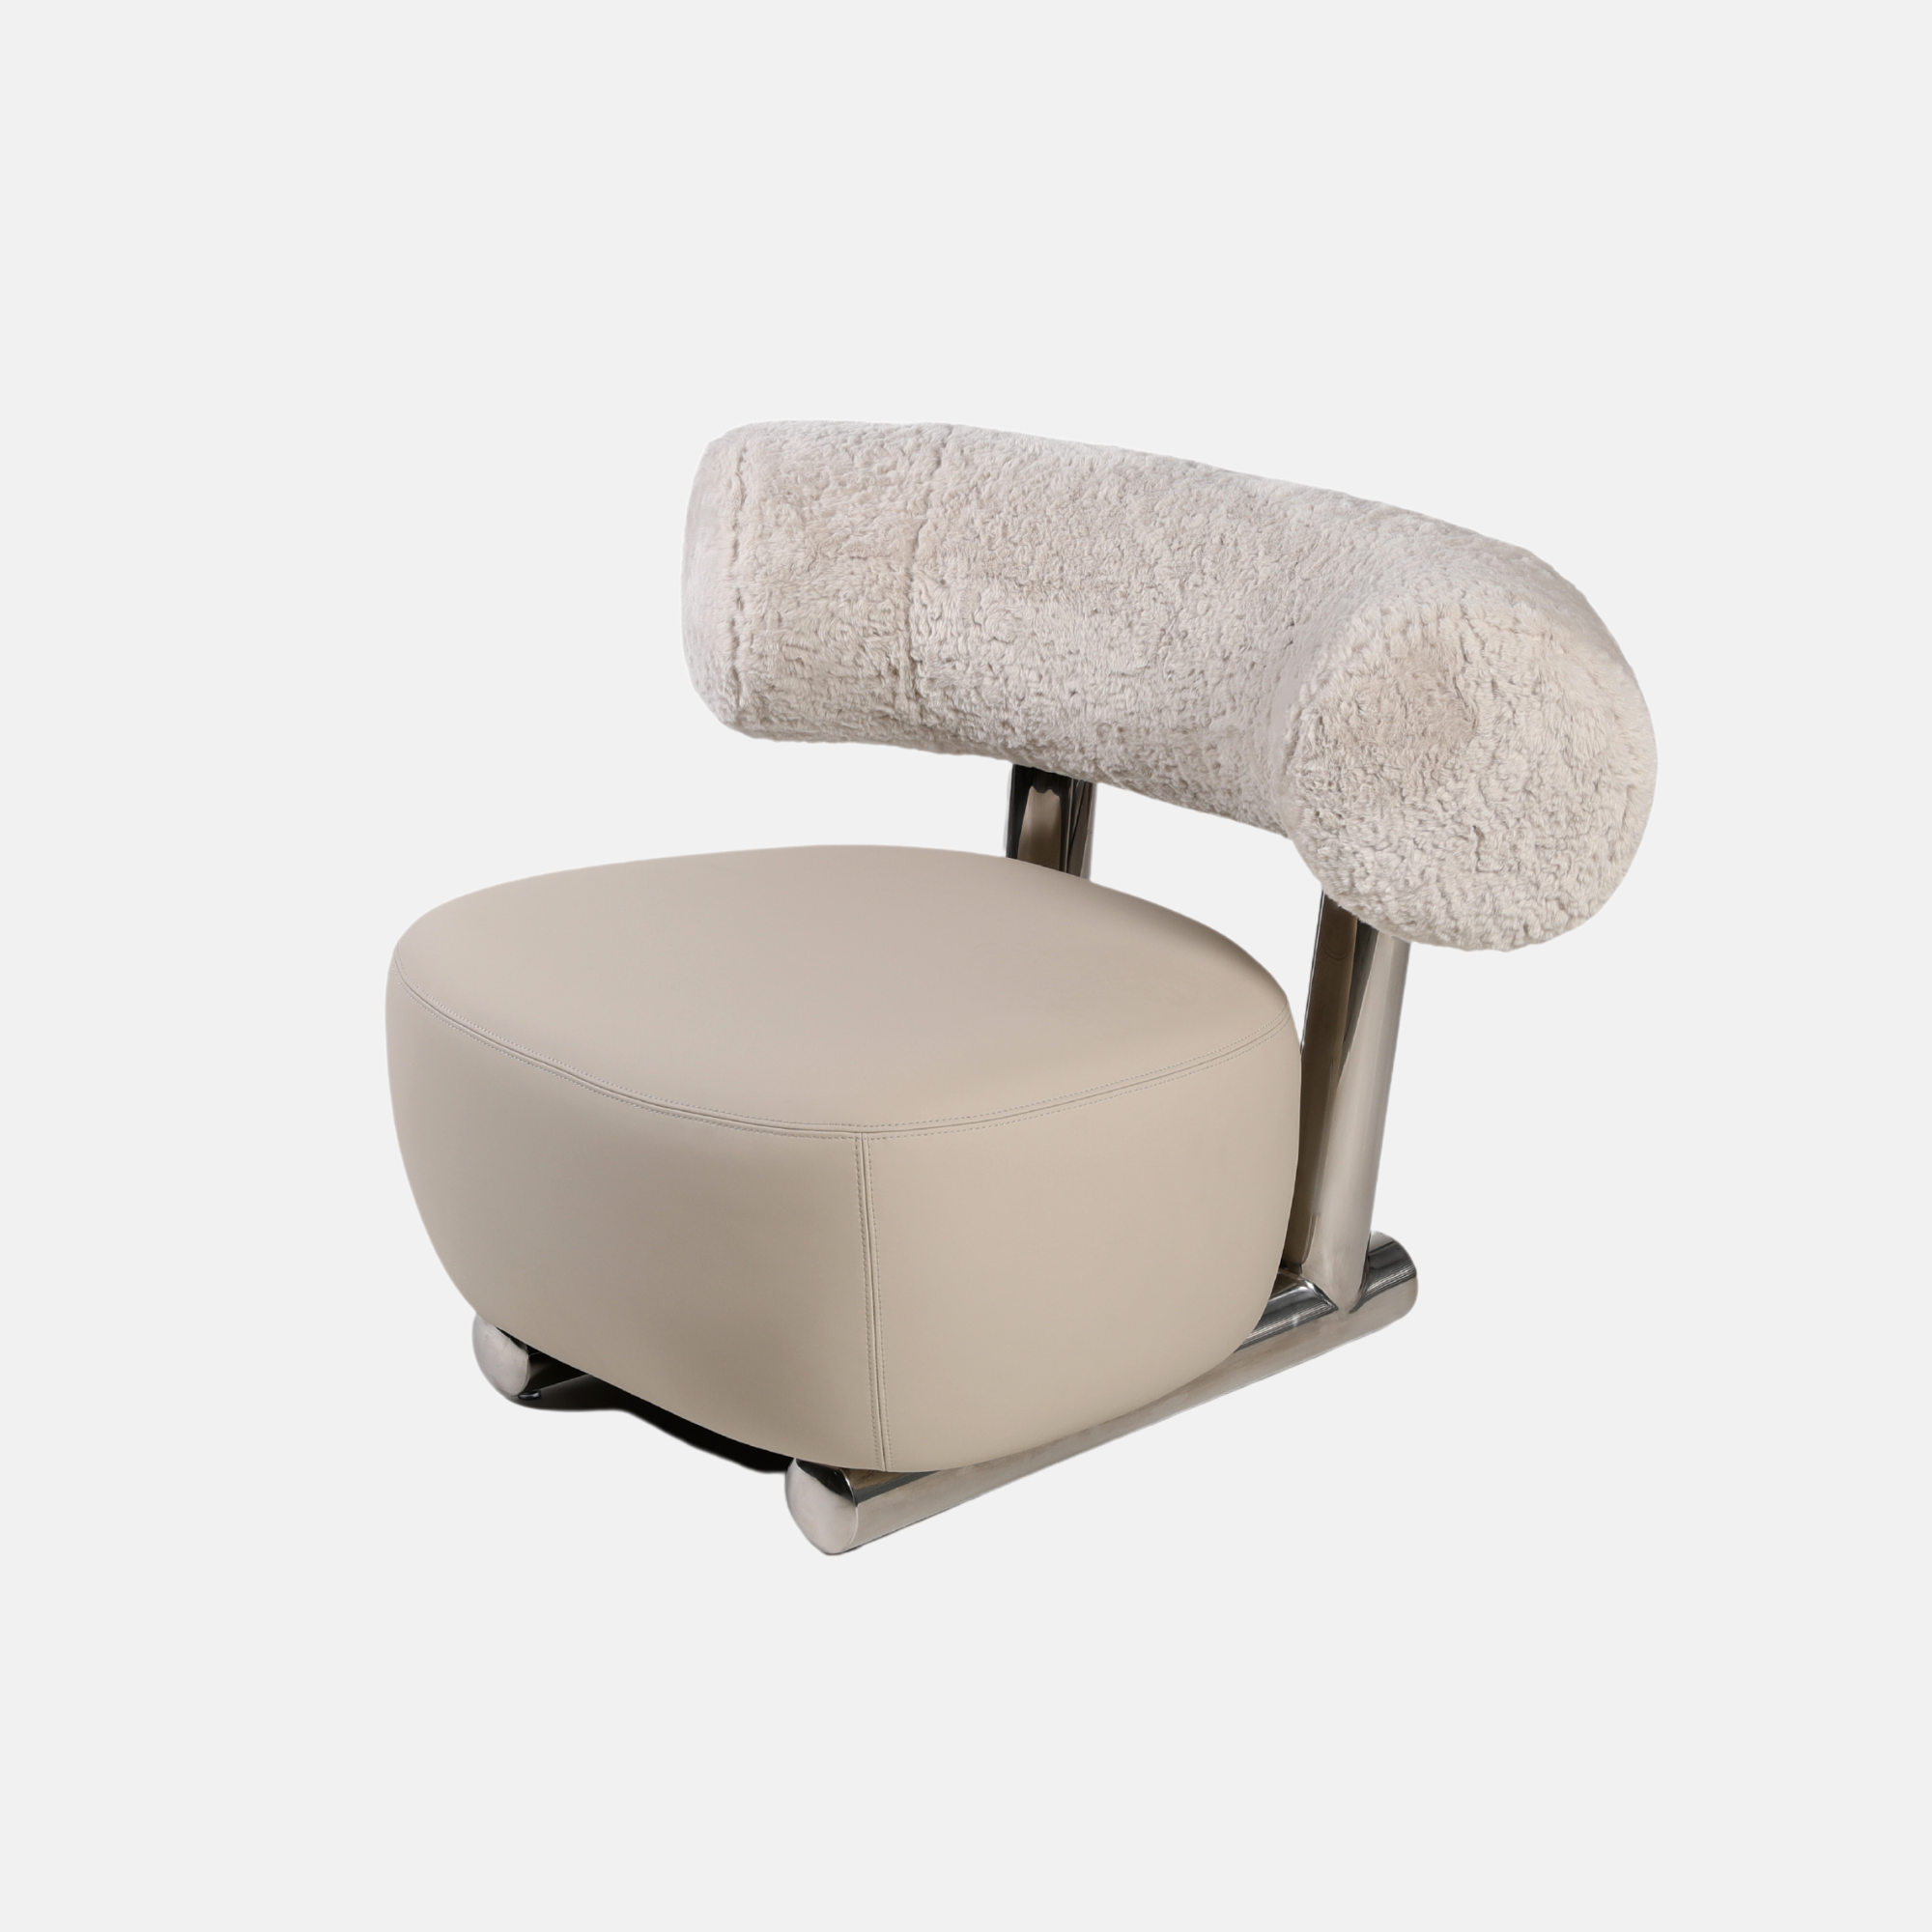 Ski Lounge Chair - The Feelter